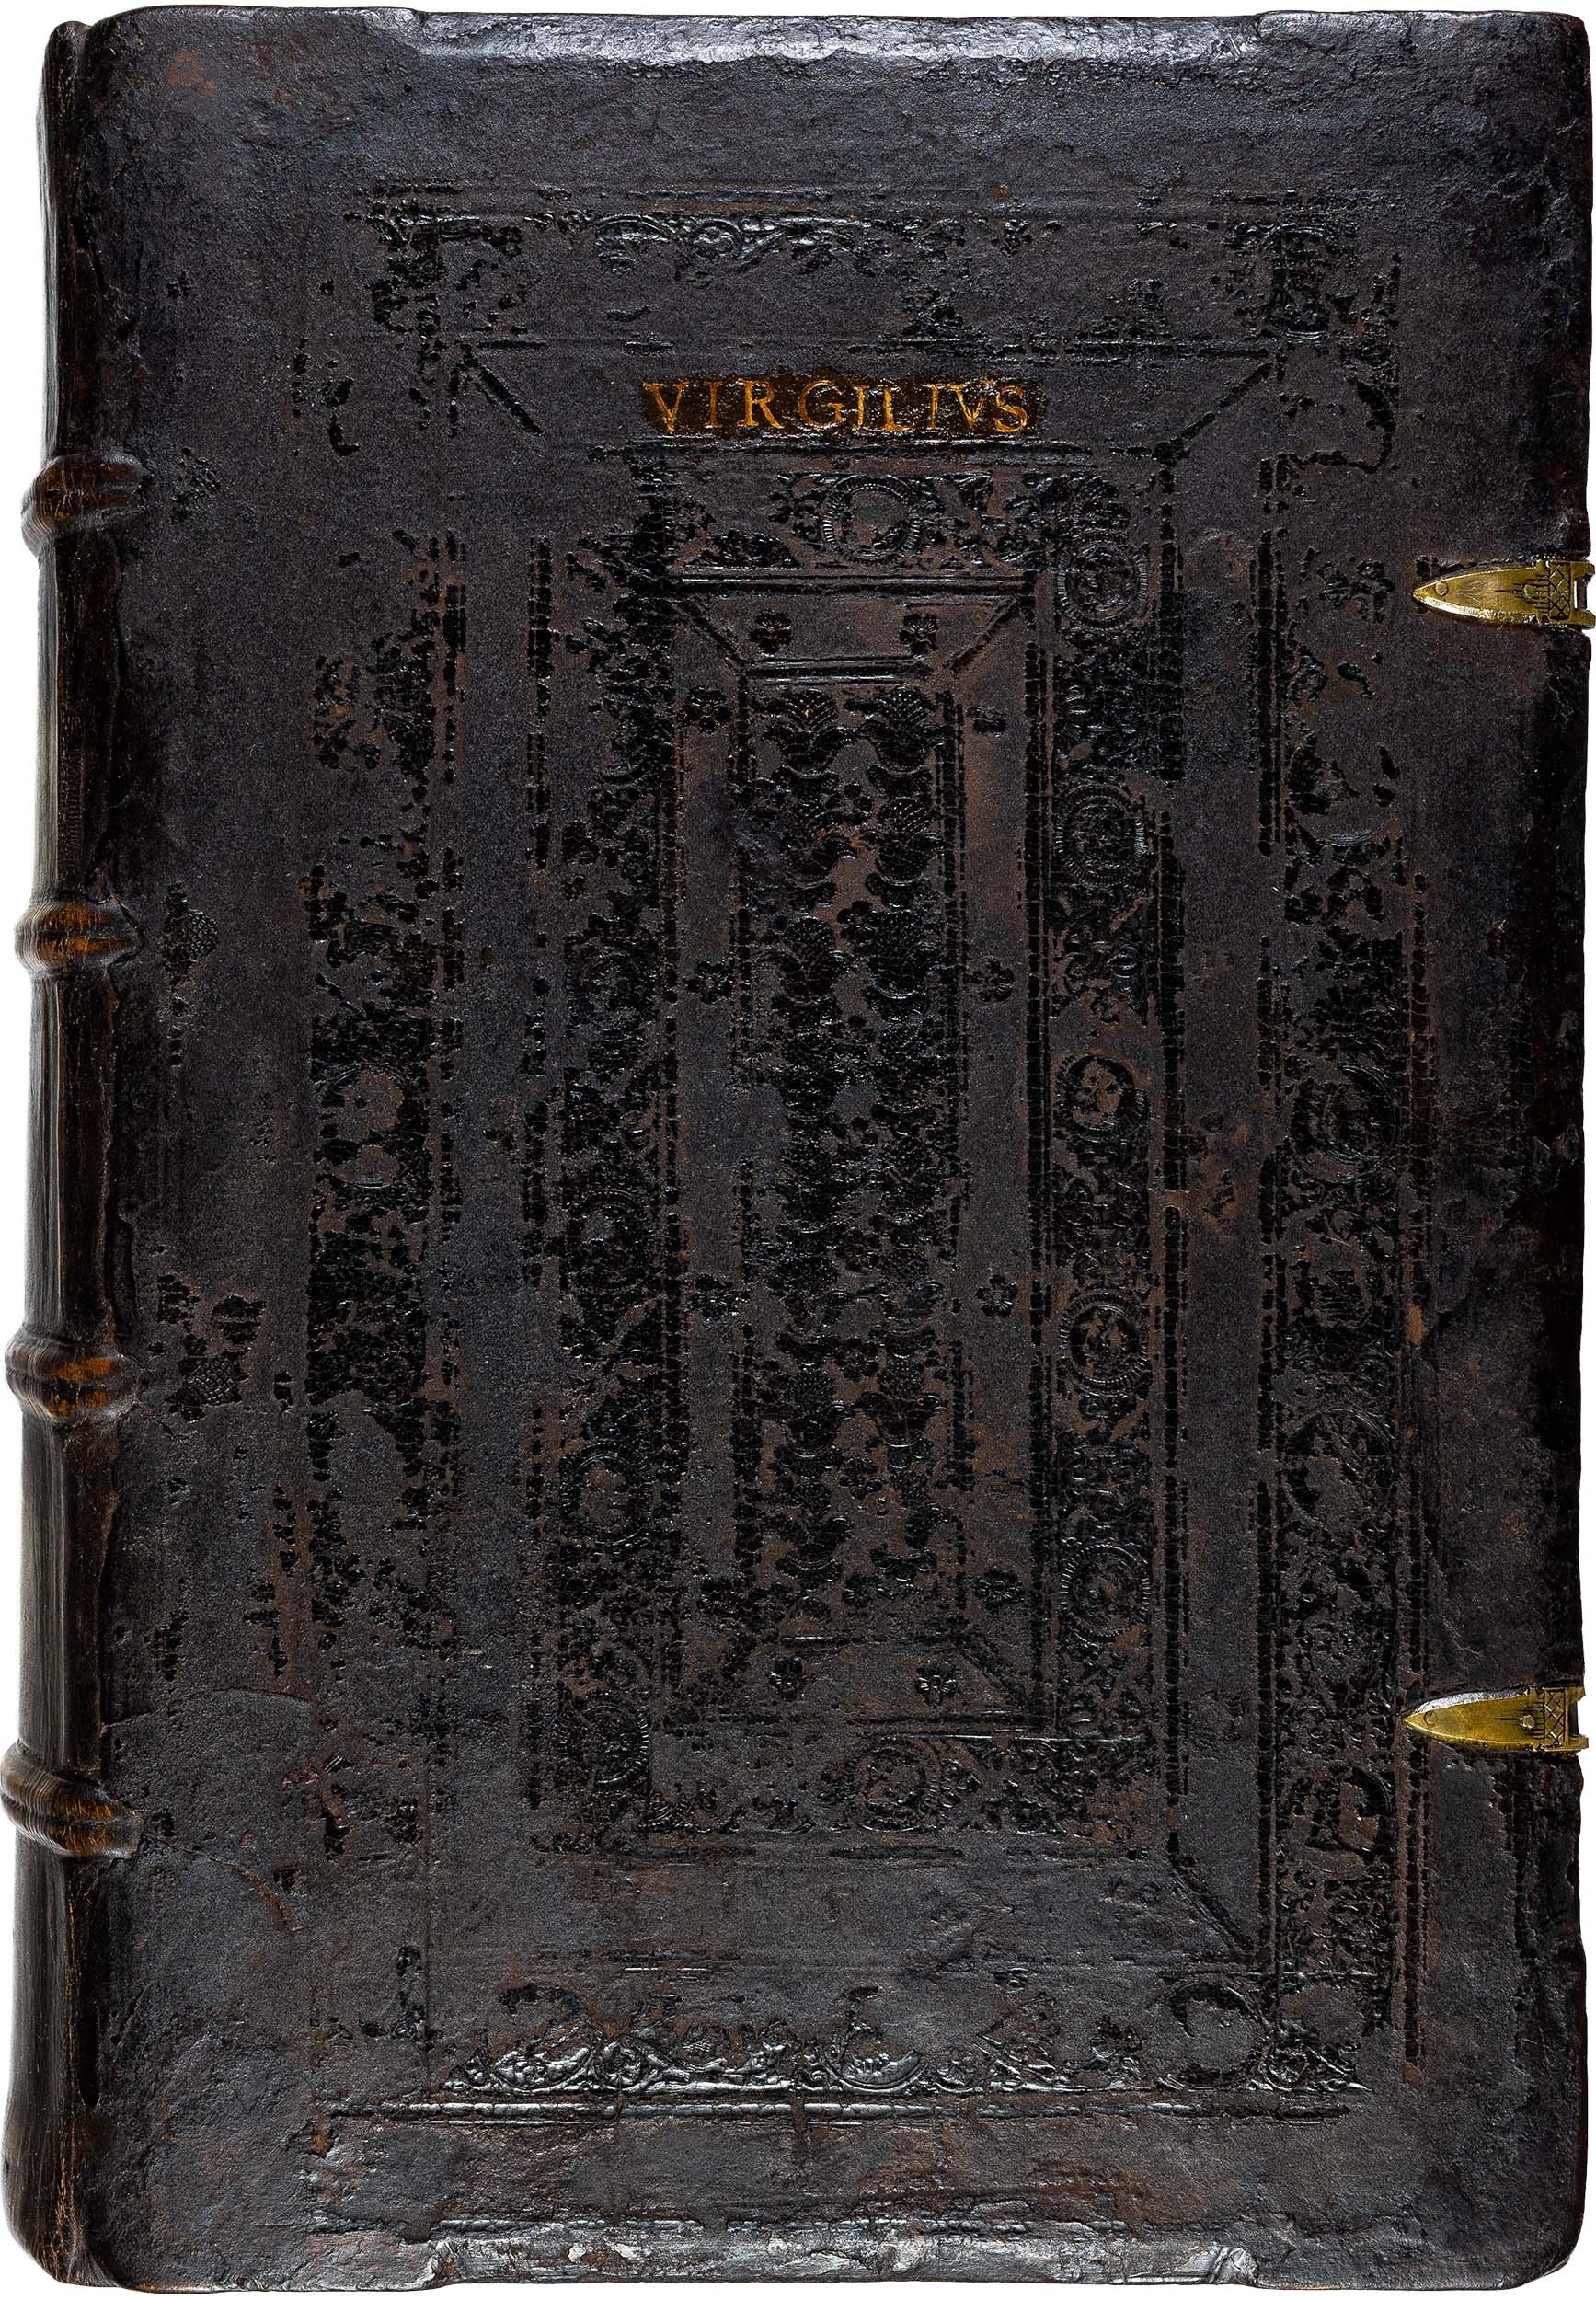 vergil-opera-1517-lyon-hand-coloured-woodcuts-for-sale-blind-tooled-16th-century-calf-leather-binding.jpg